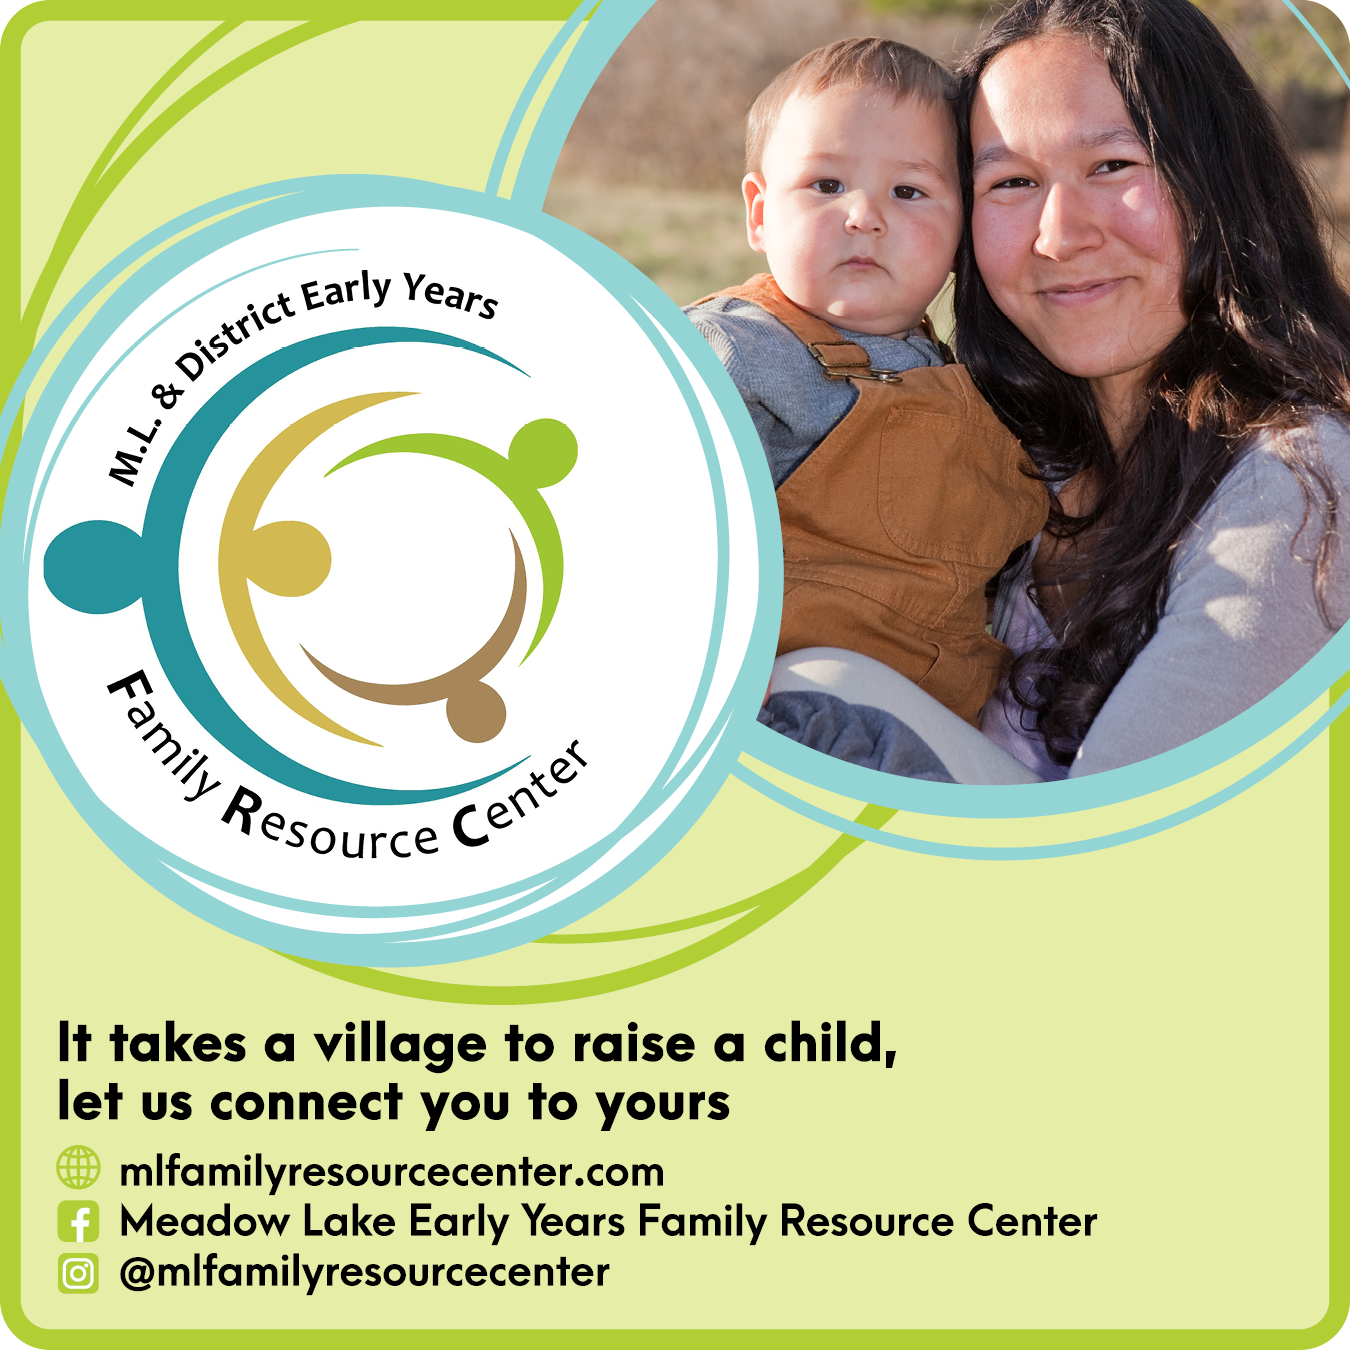 Meadow Lake & District Early Years Family Resource Center